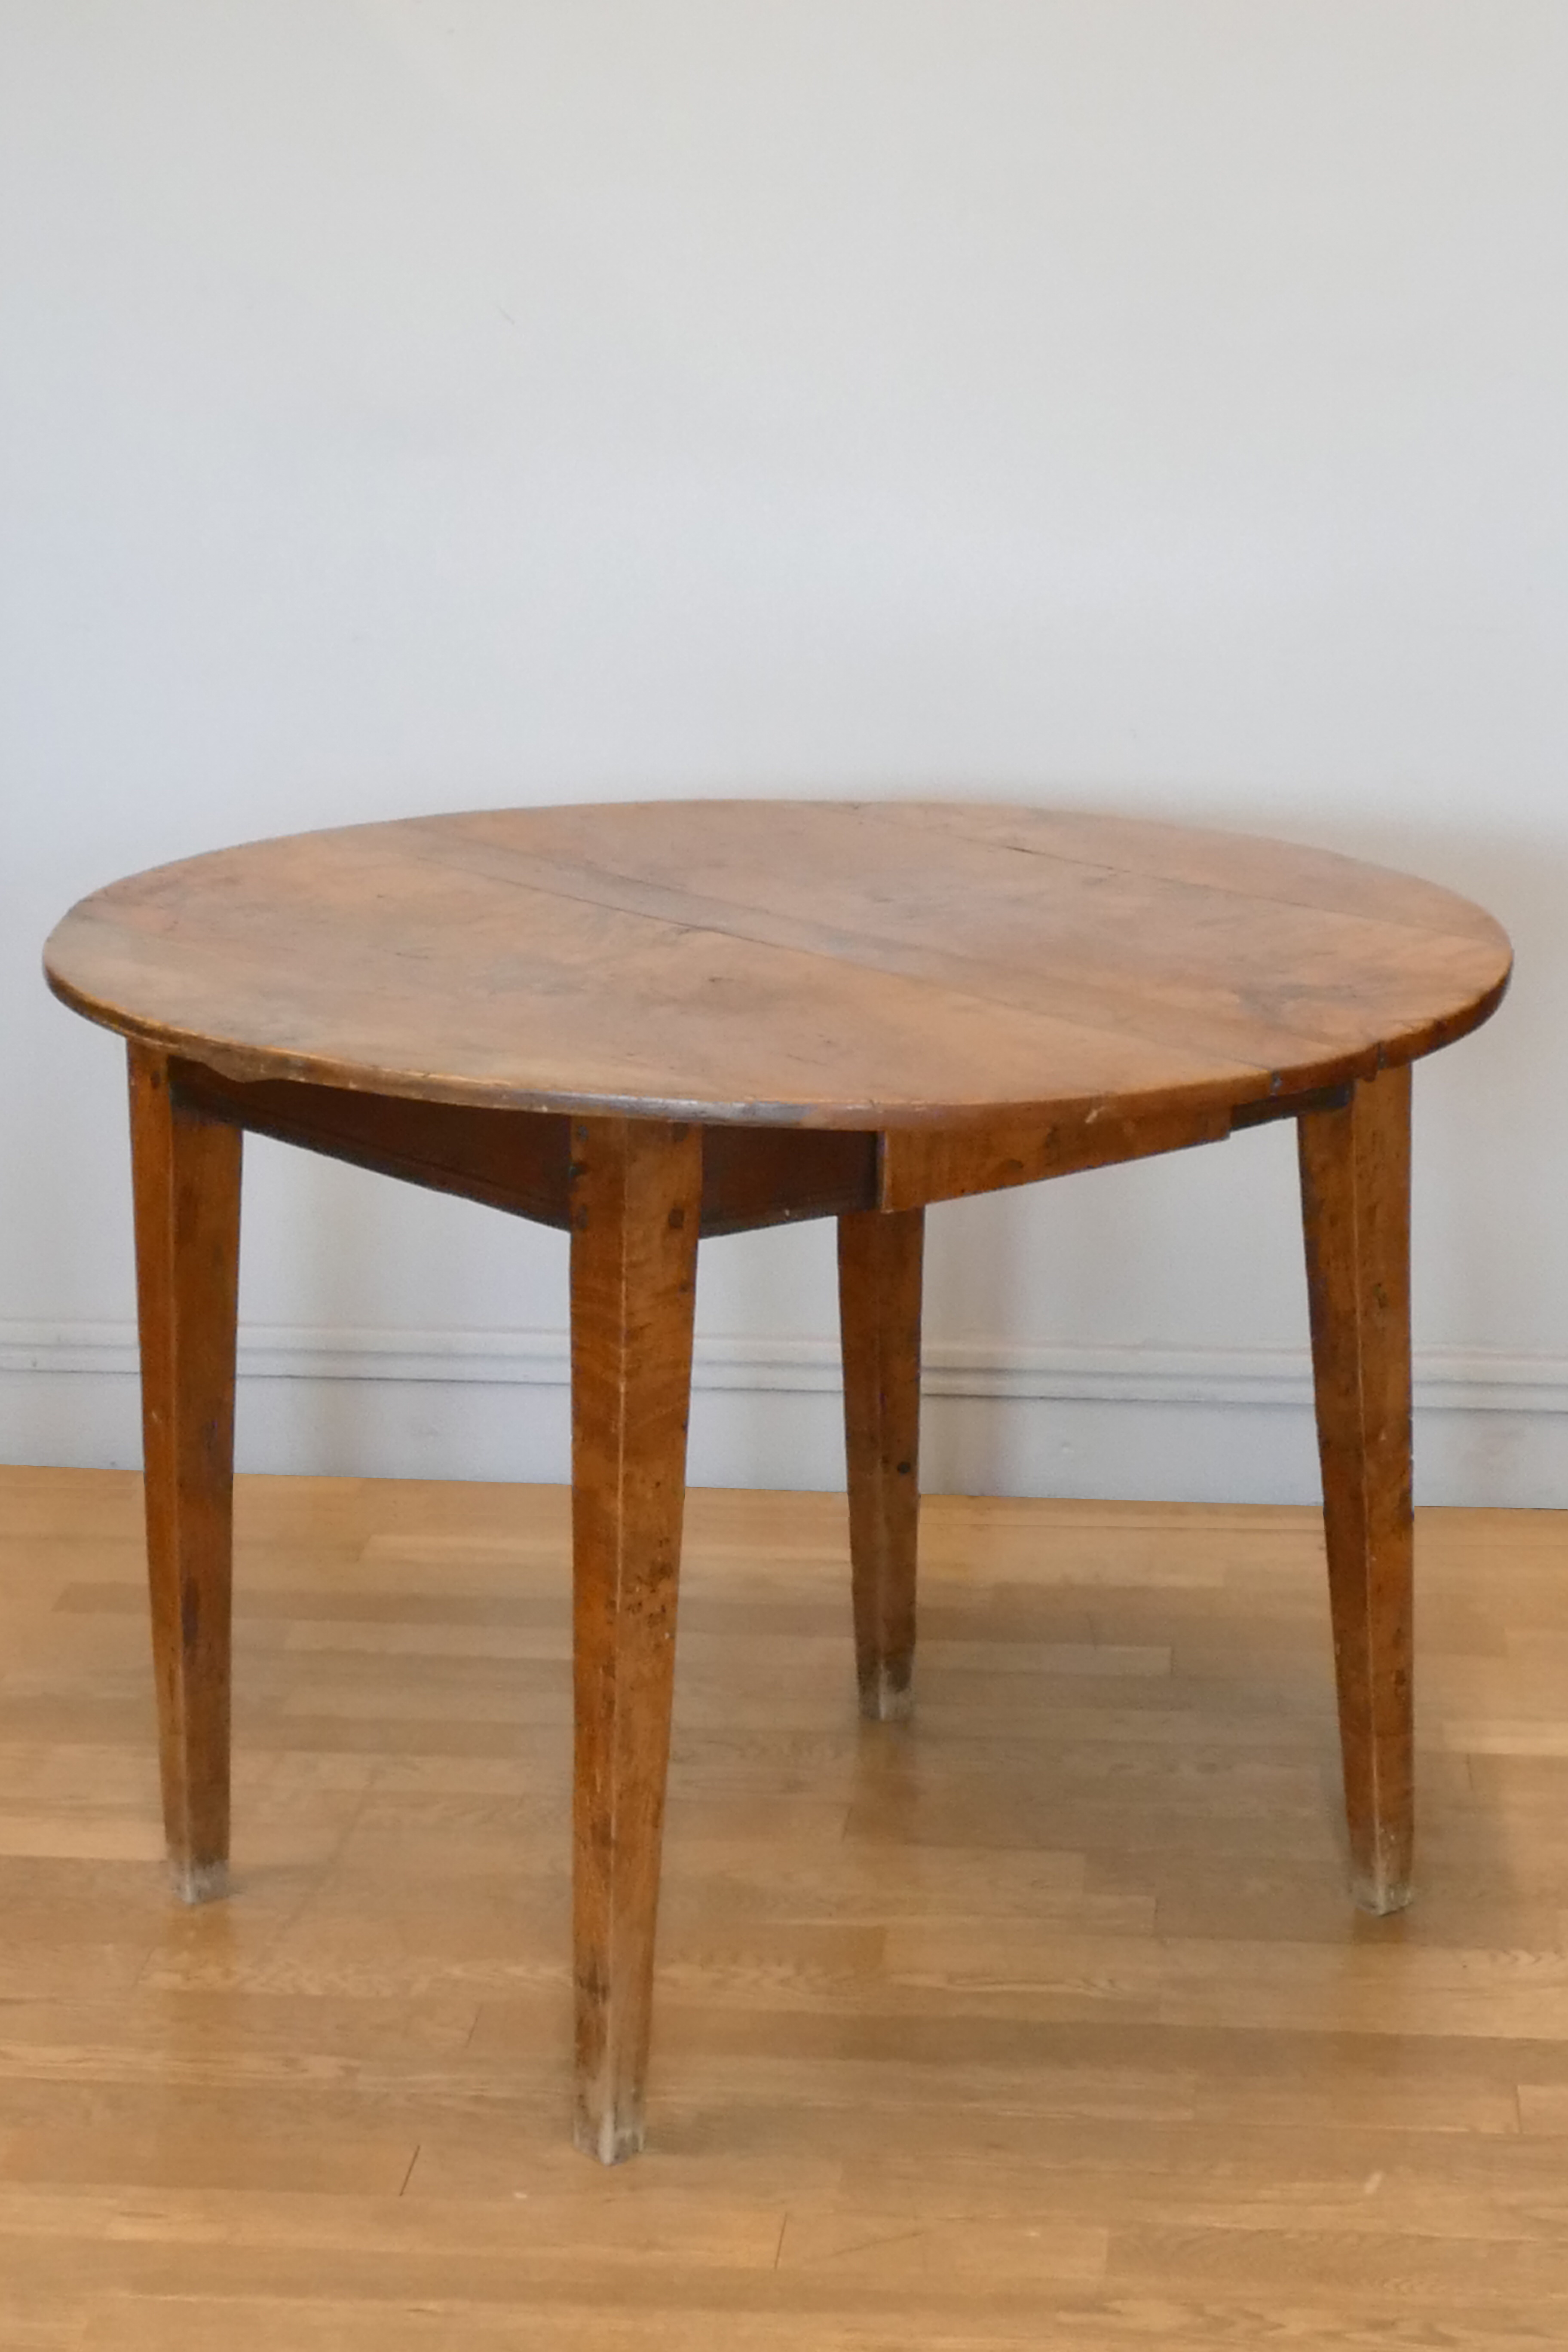 An 18th century country made circular elm table, five section top, frieze drawer, square tapering